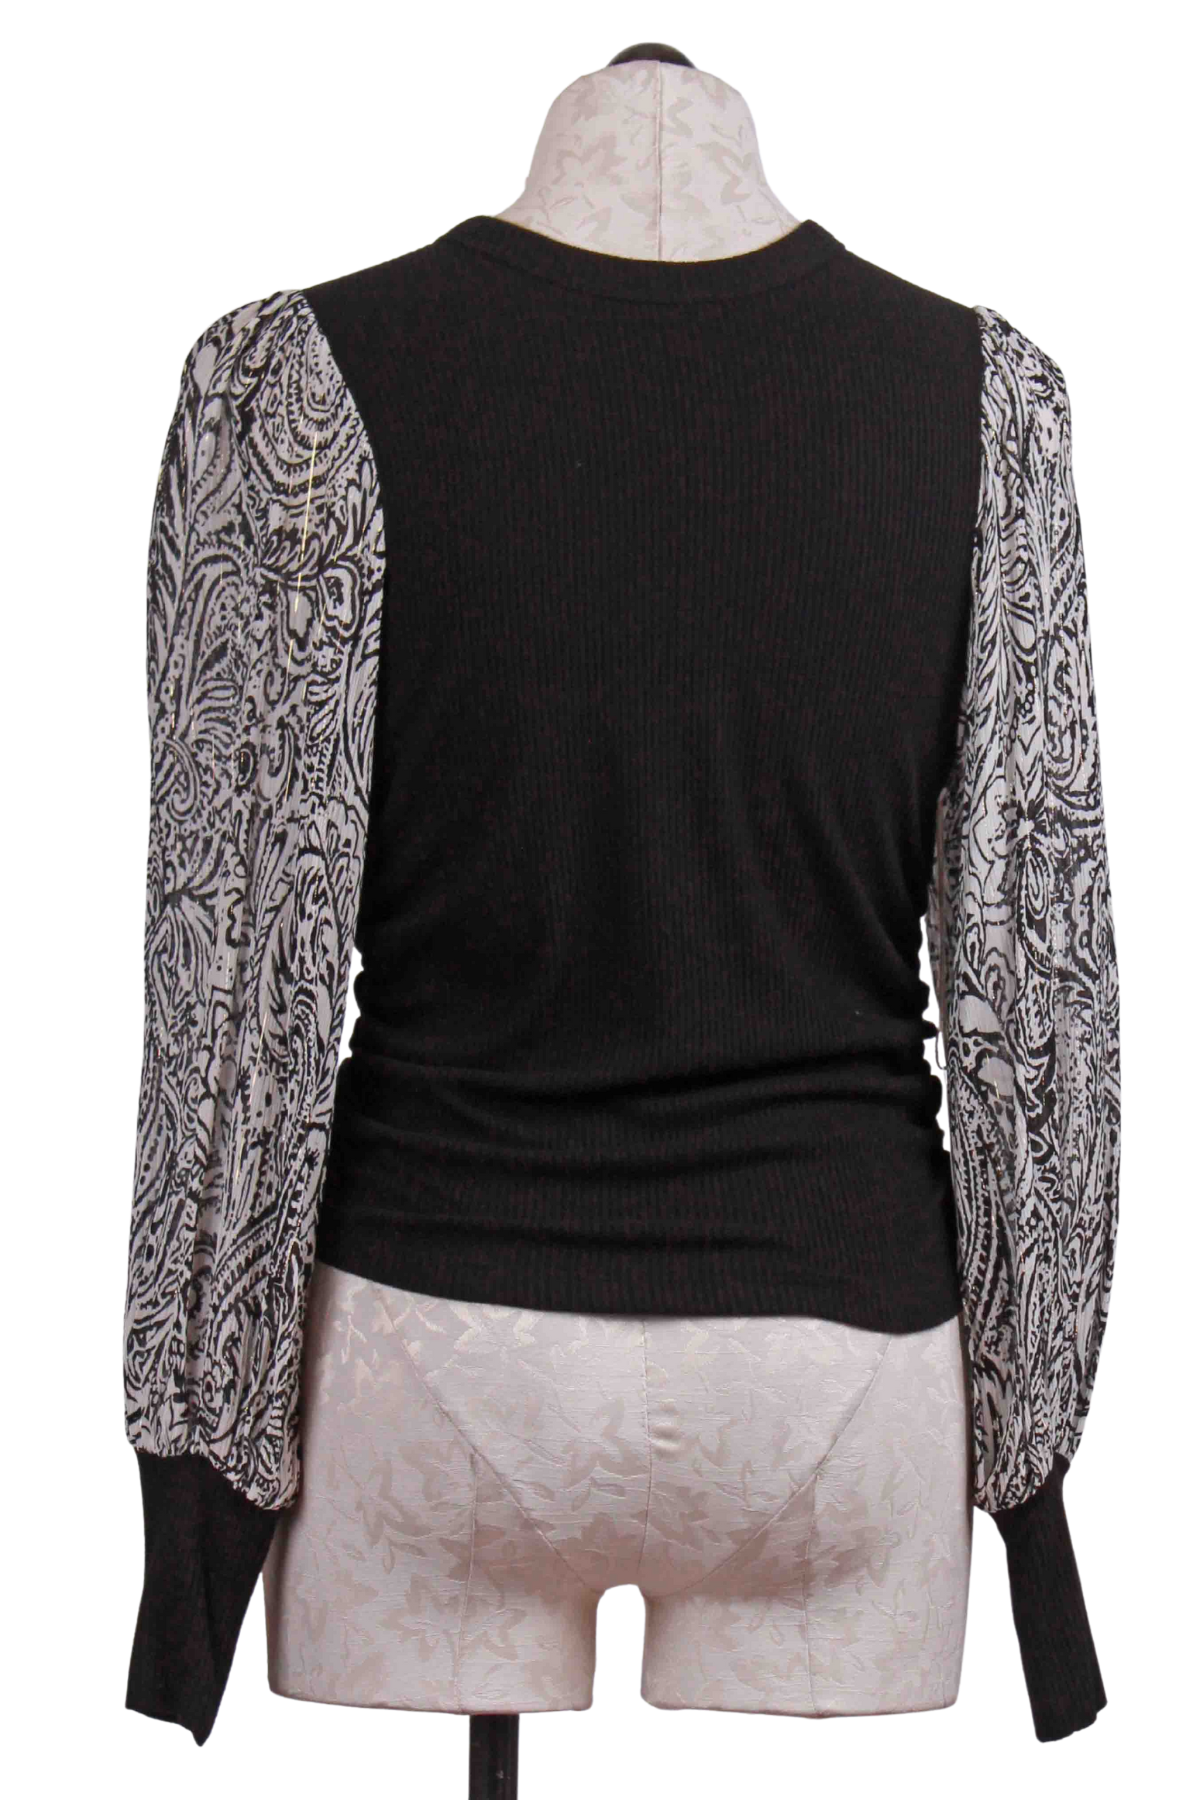 back of Black Ribbed Body Top by Sheer Paisley Sleeves by Fifteen Twenty